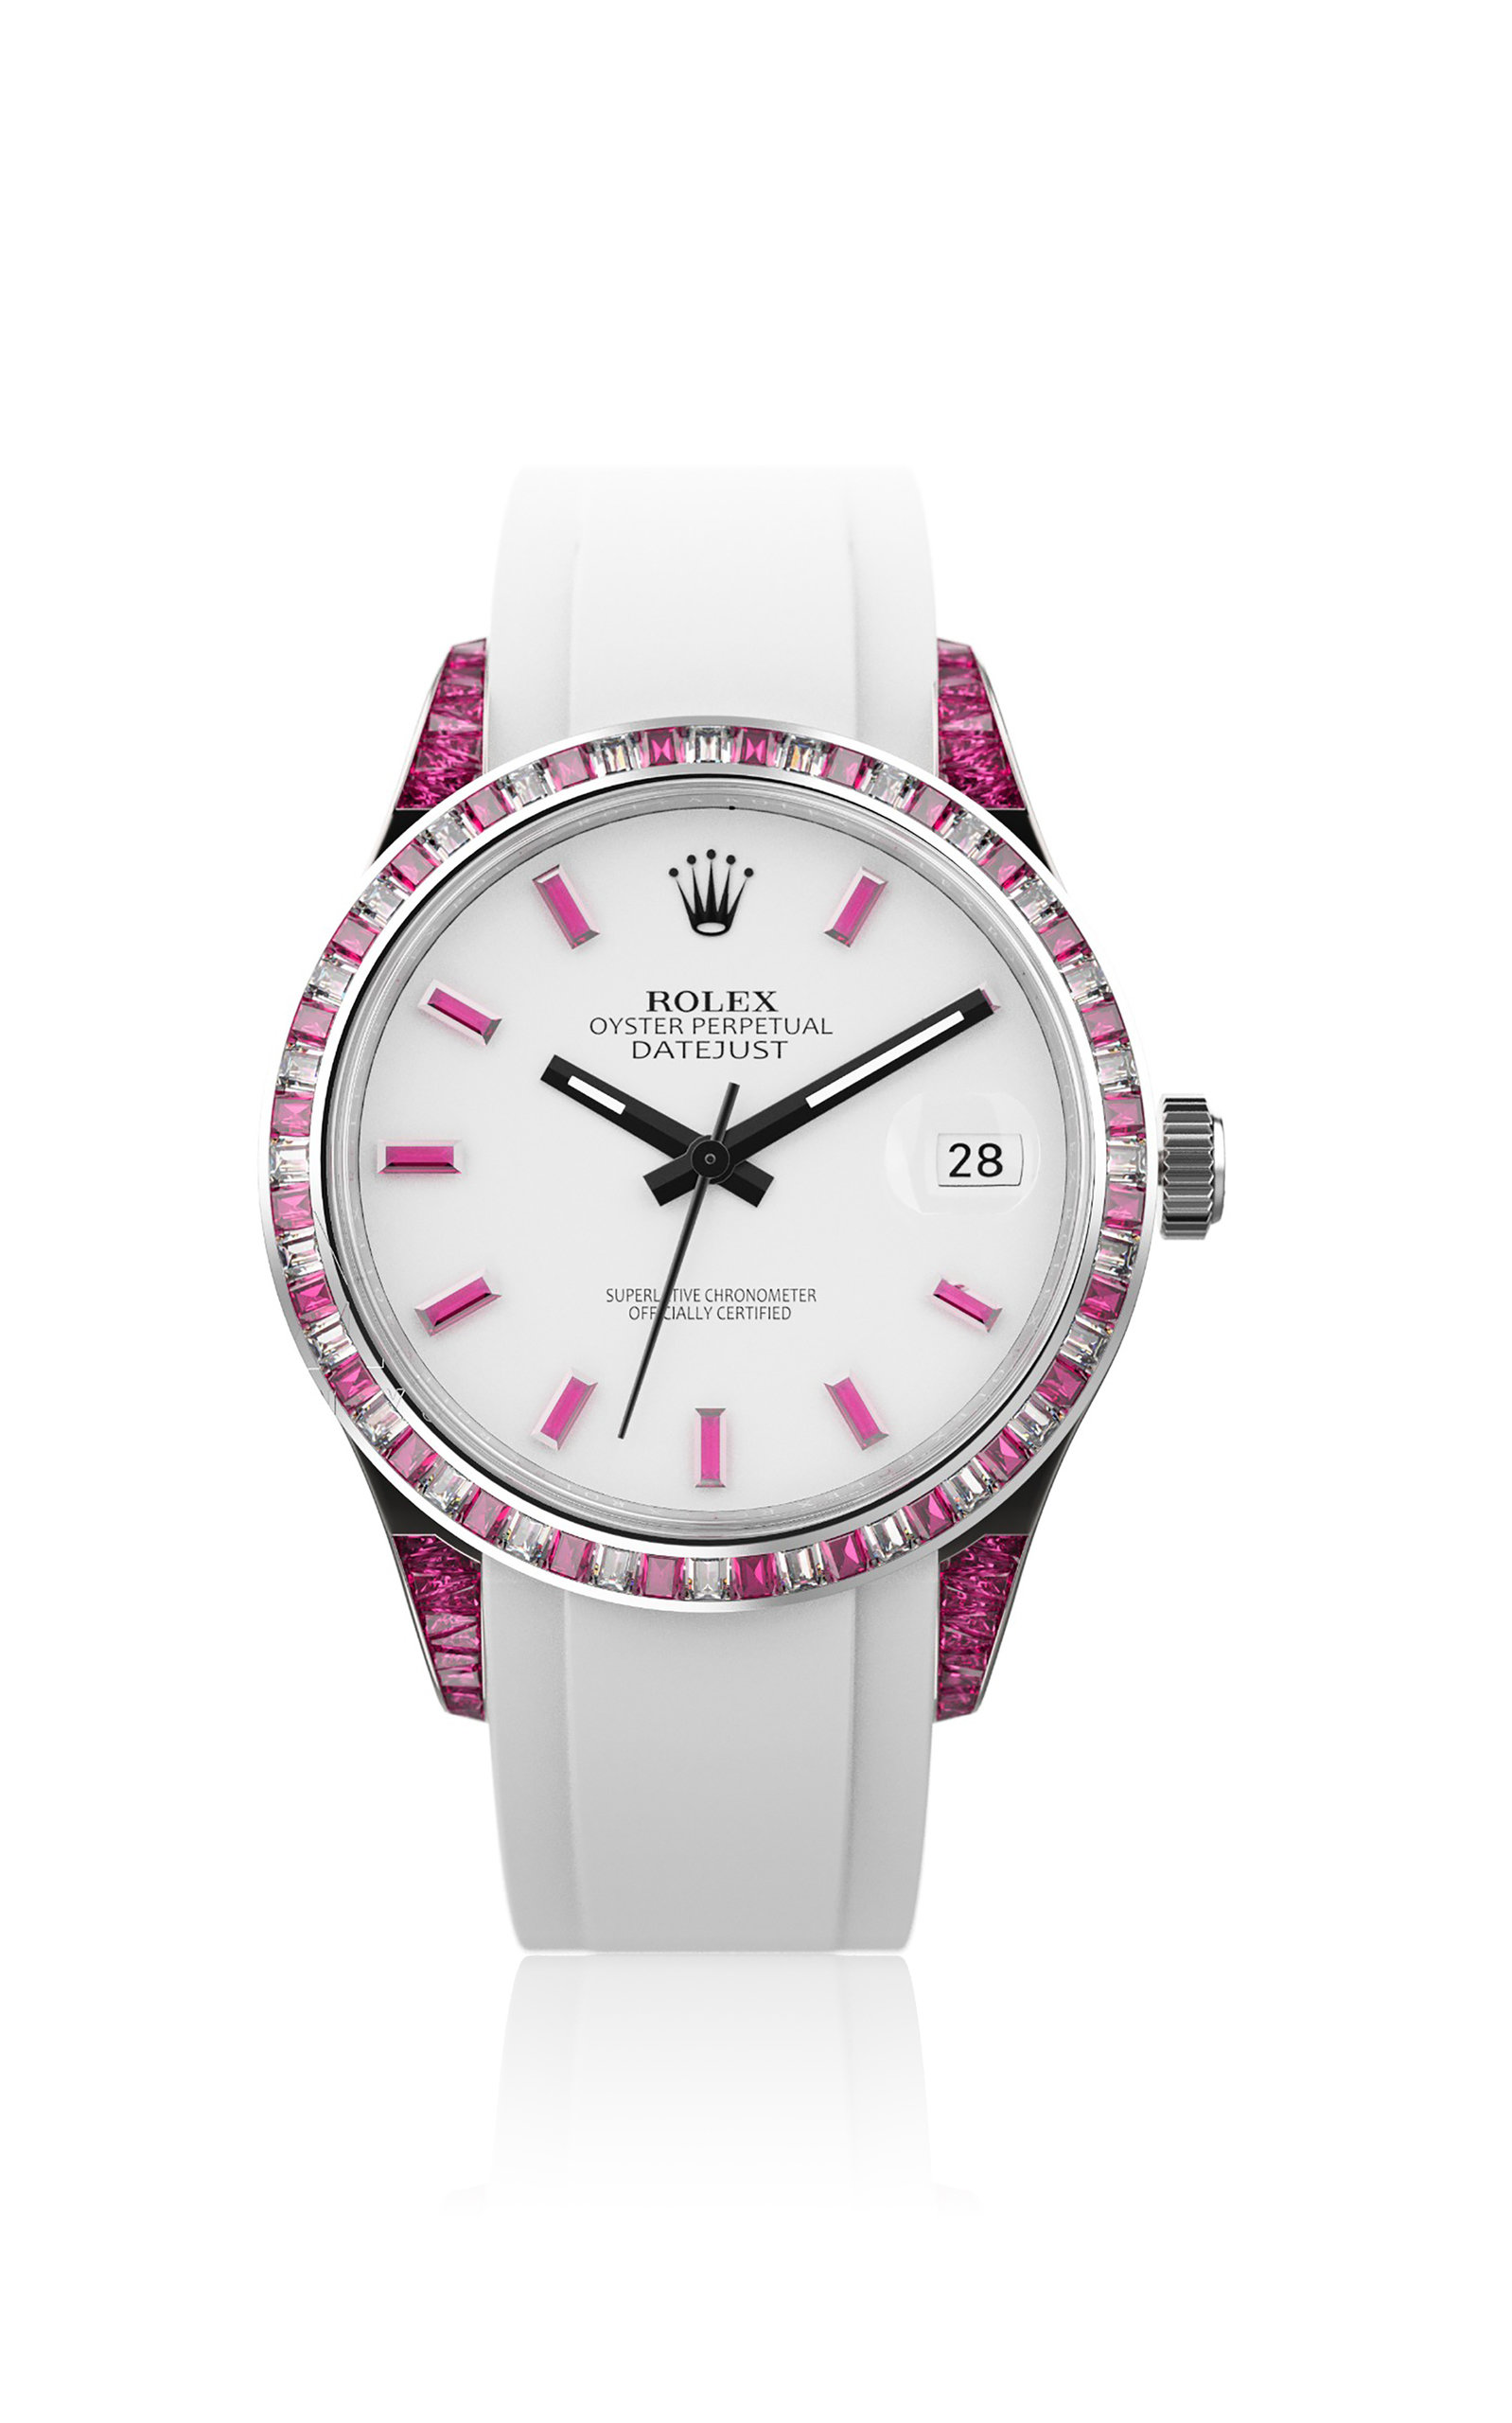 Private Label London Roulette Pink Datejust Watch